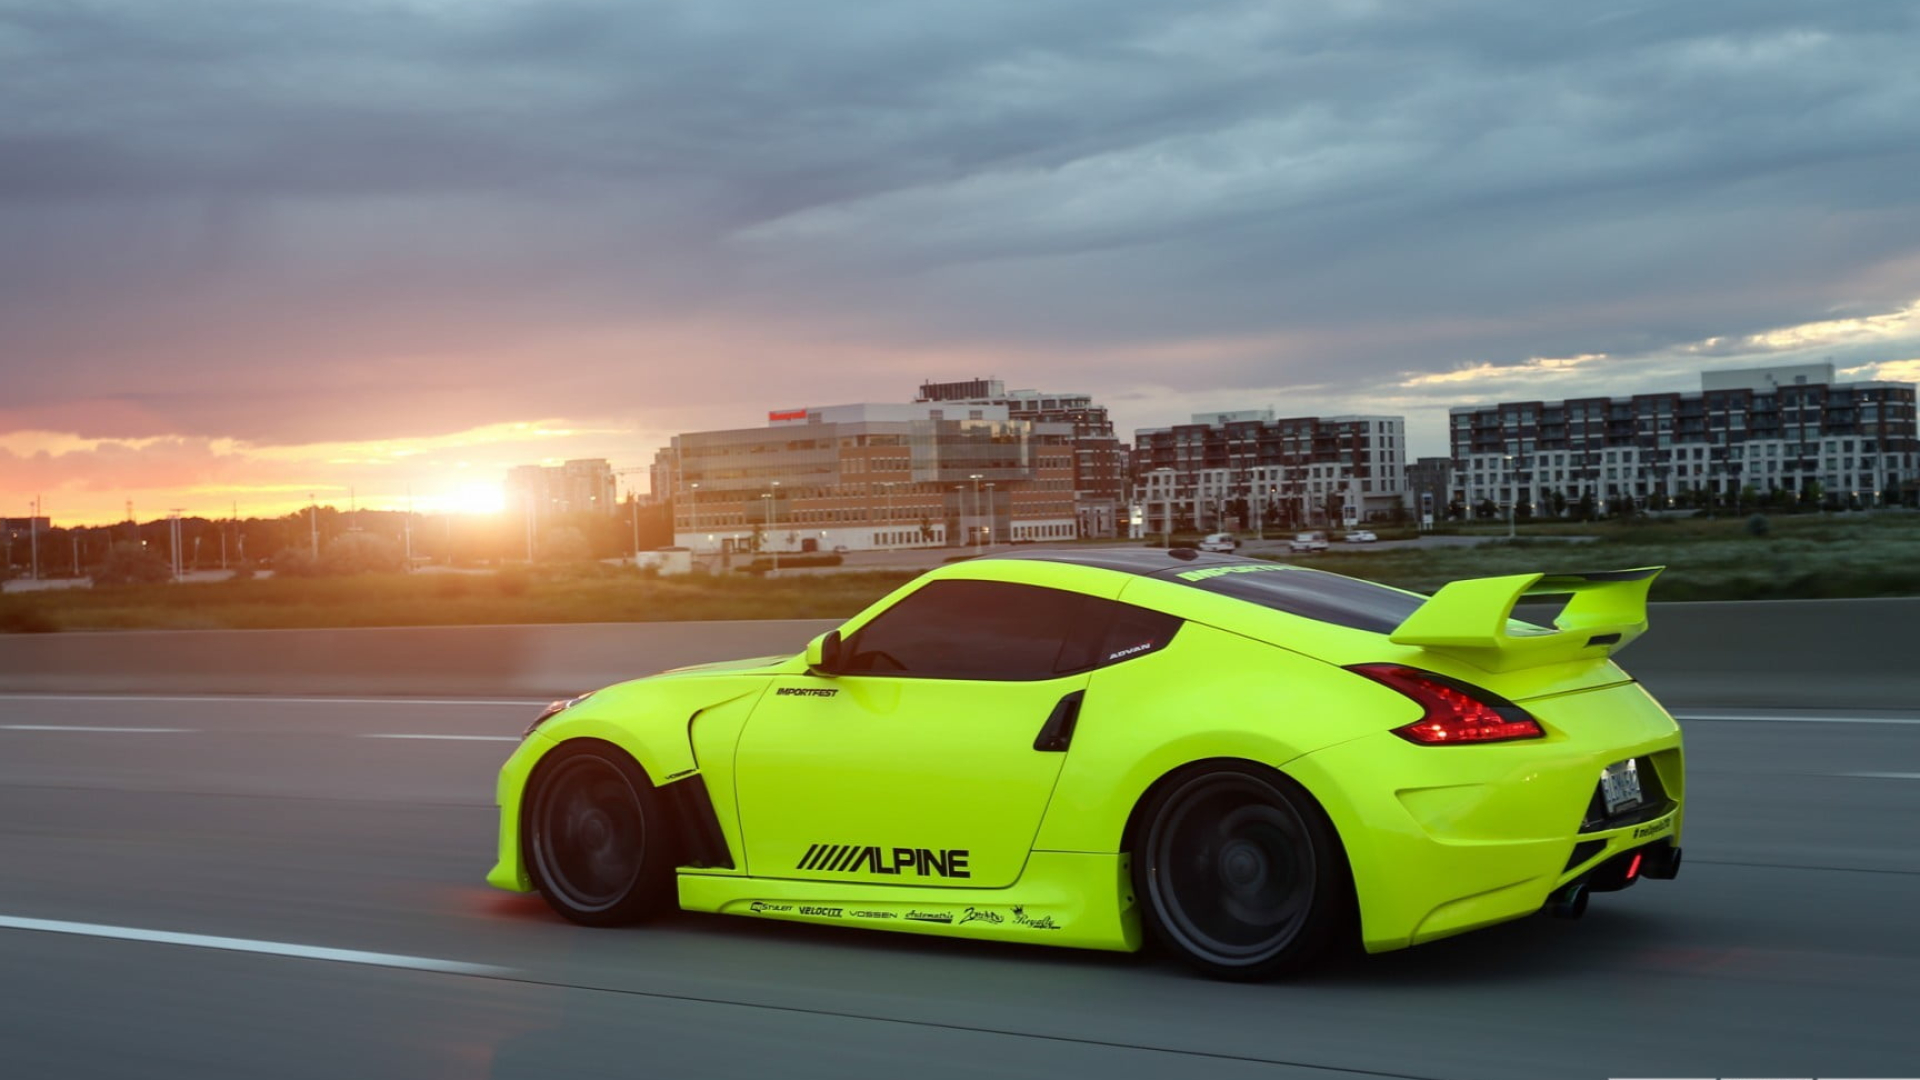 1920x1080 Green Nissan 370z on road during golden hour HD wallpaper